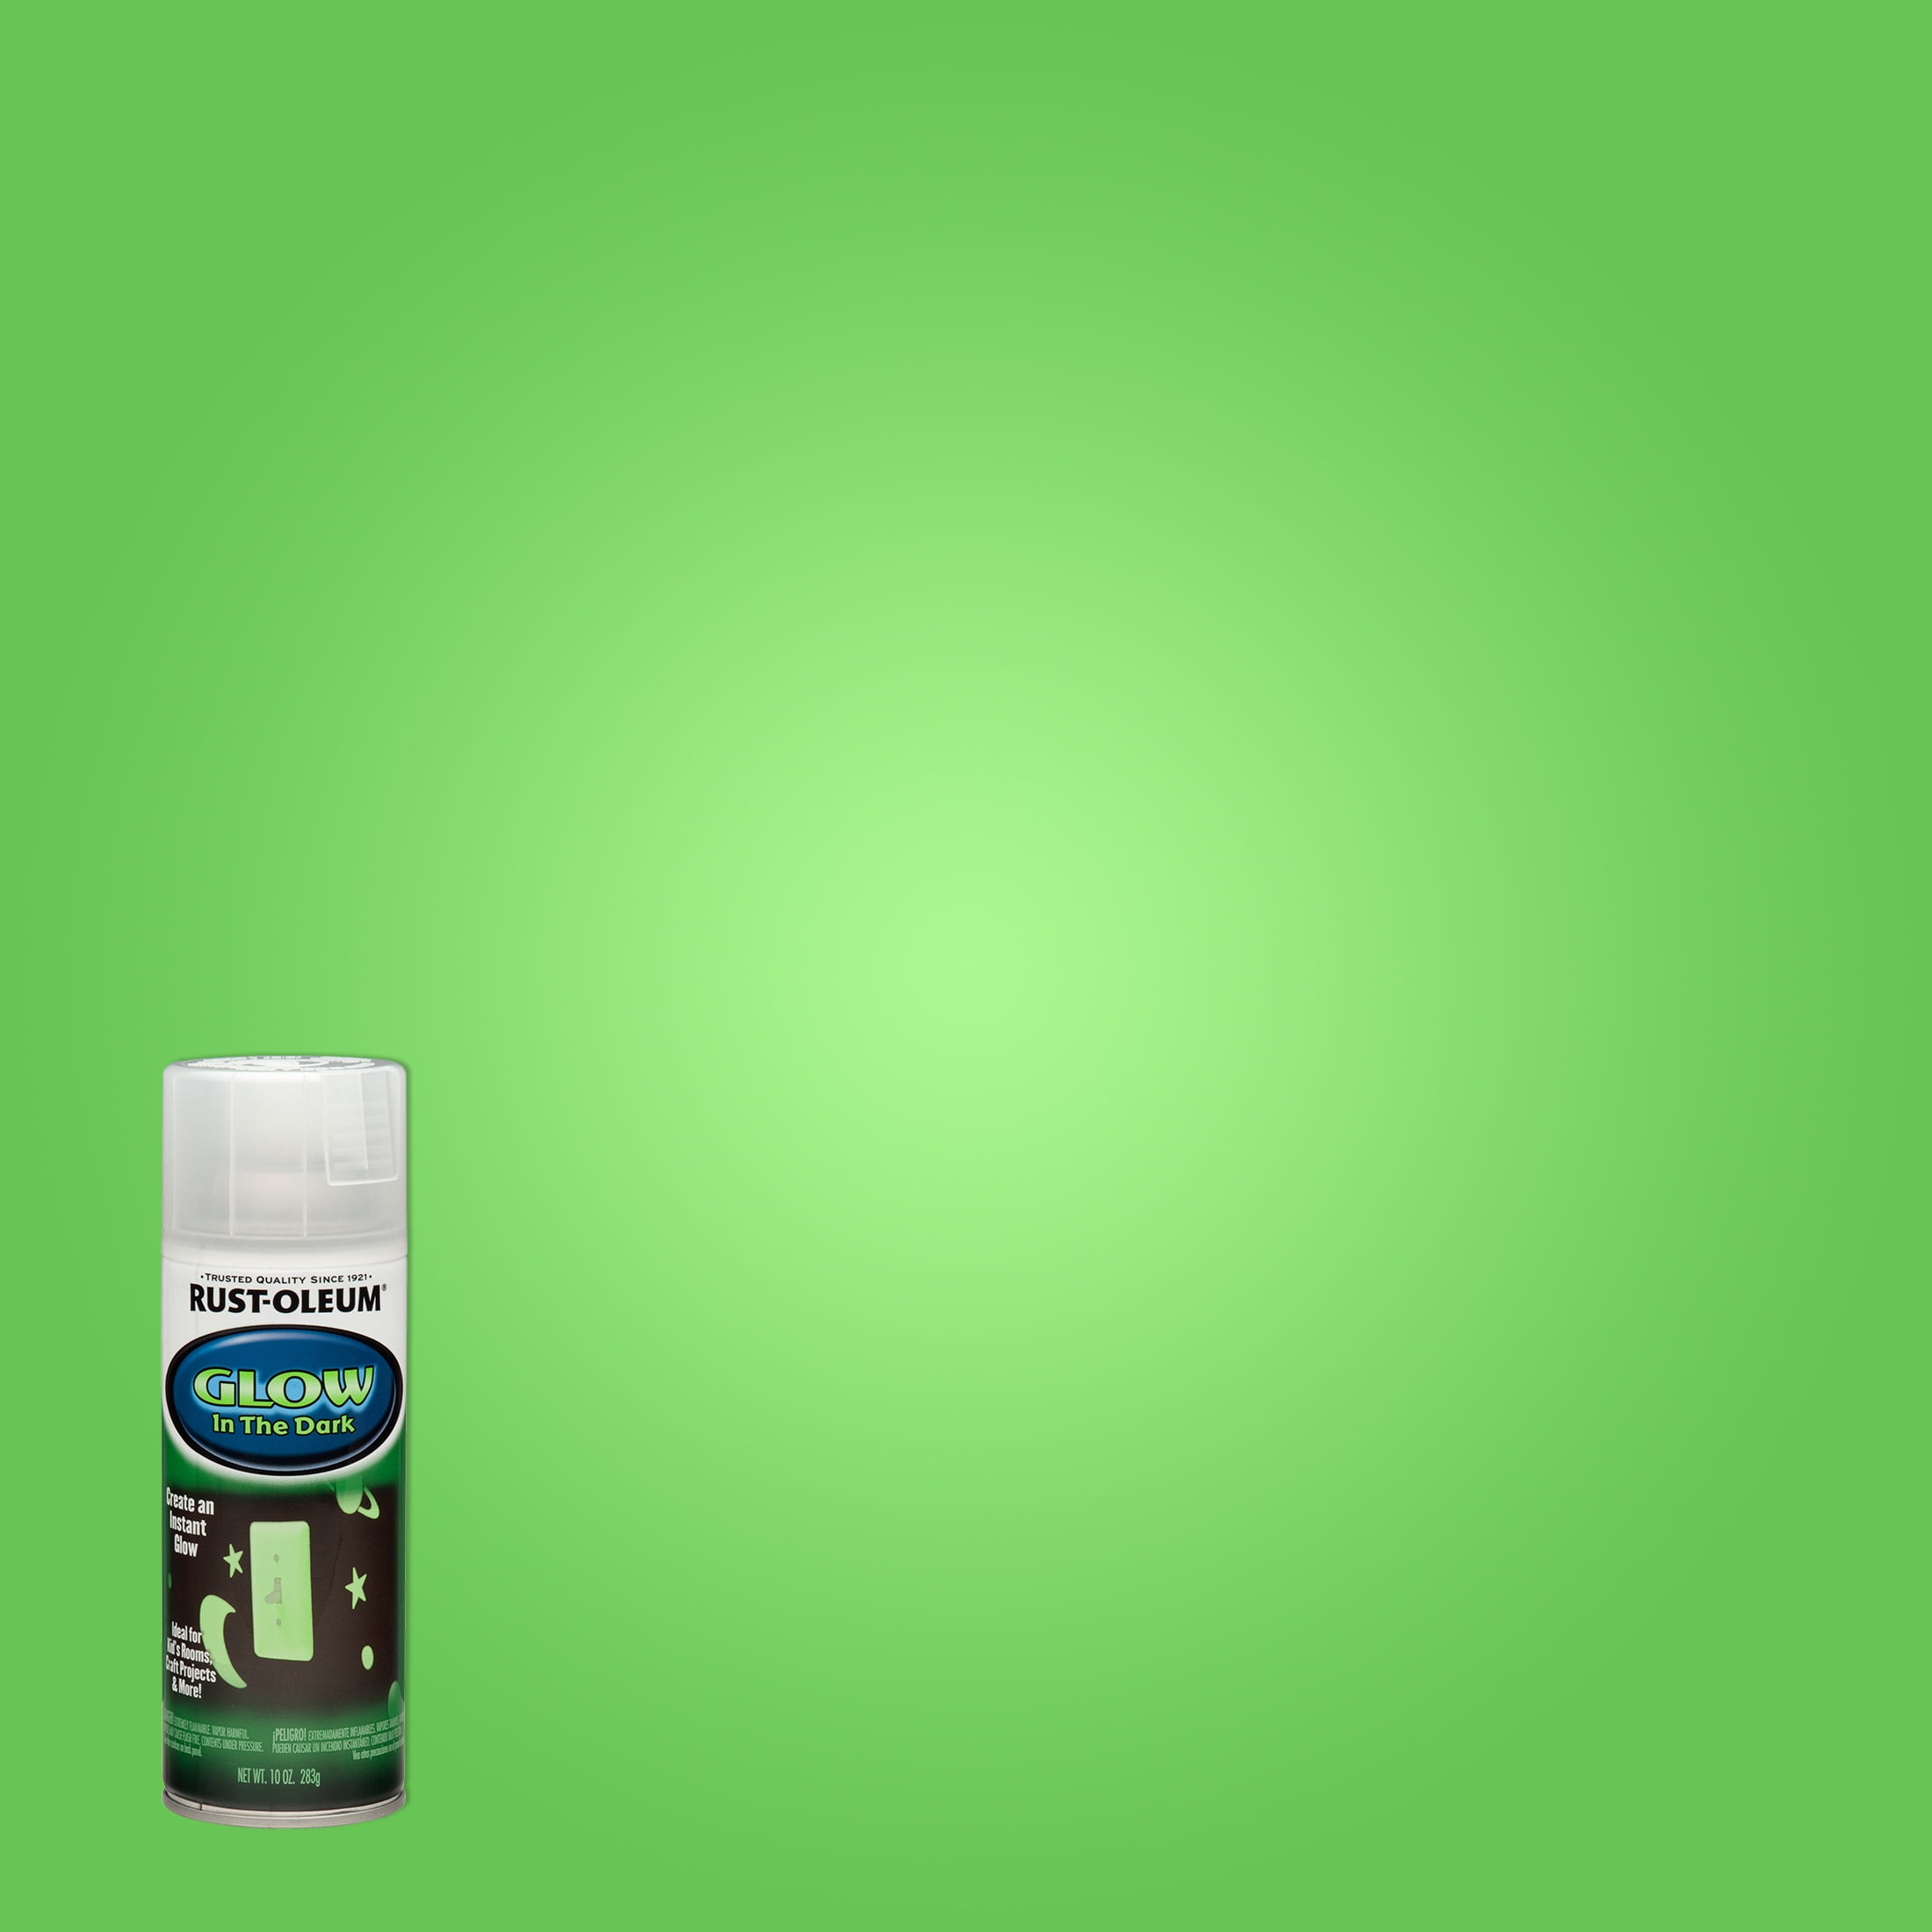 Rust-oleum glow in the dark will work, but you have to paint first with a  neon color such as key lime gloss.